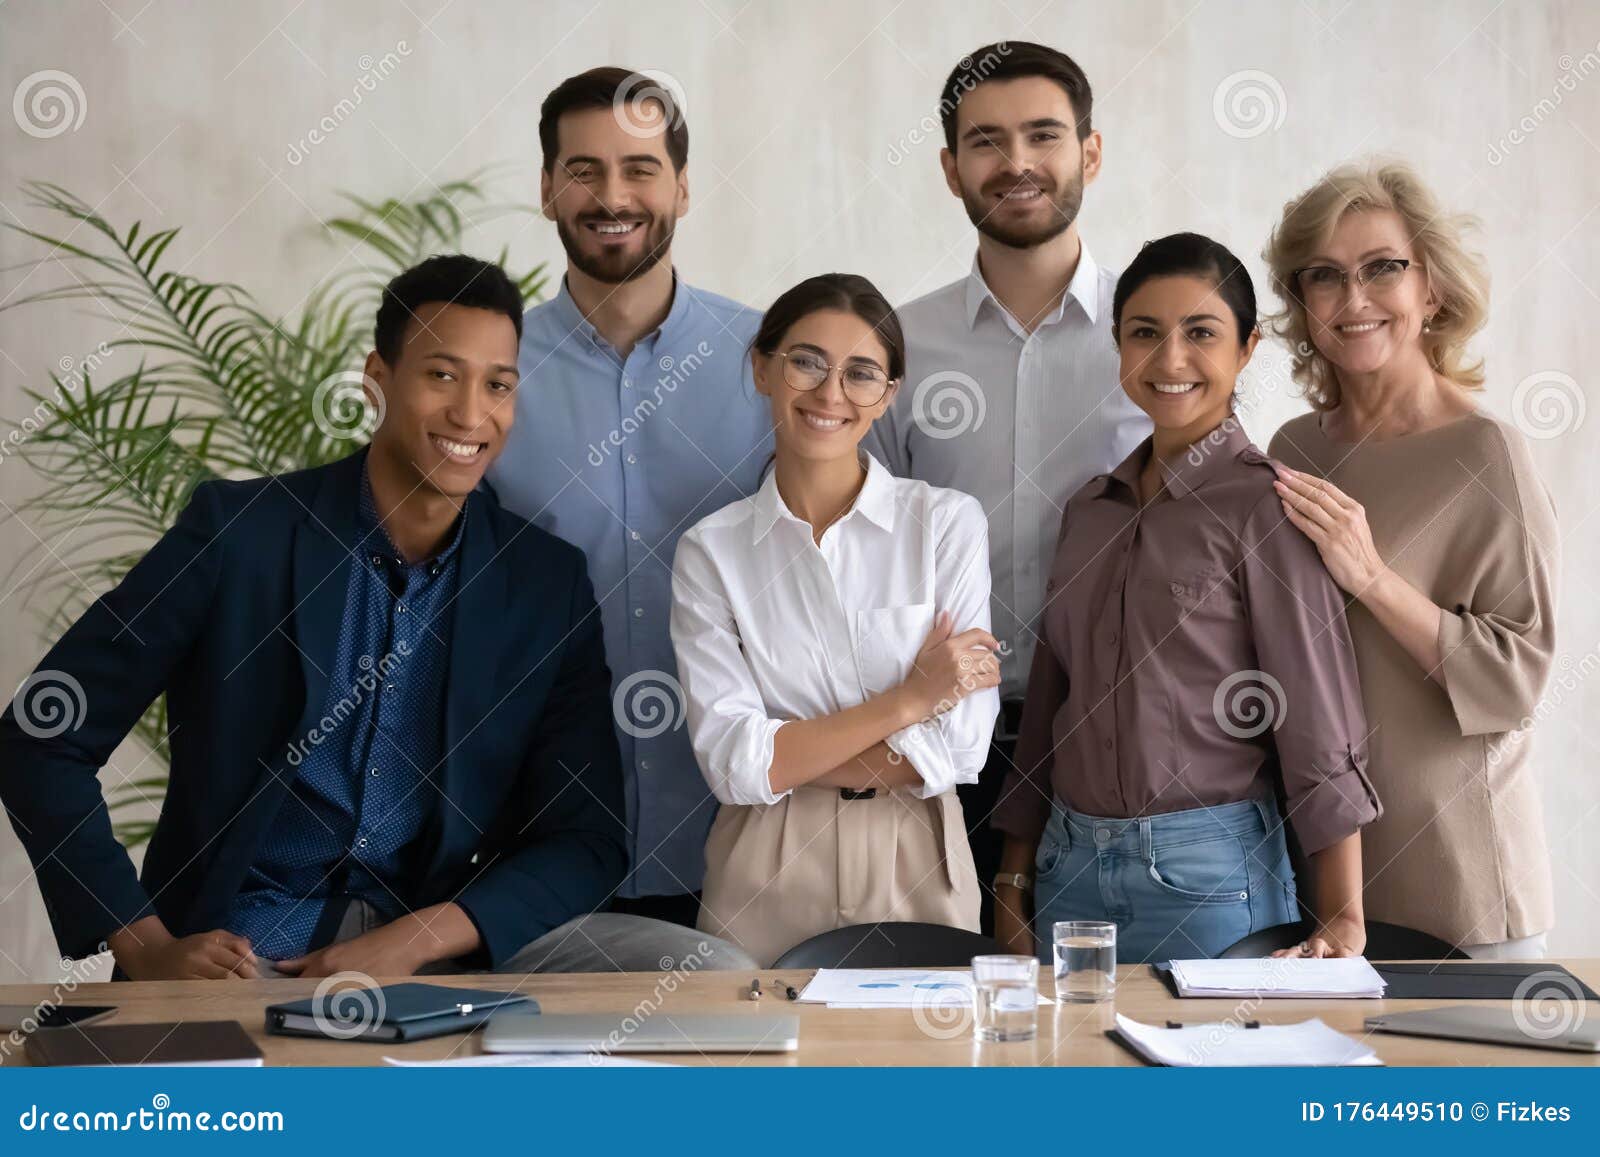 portrait of happy diverse businesspeople posing at workplace together